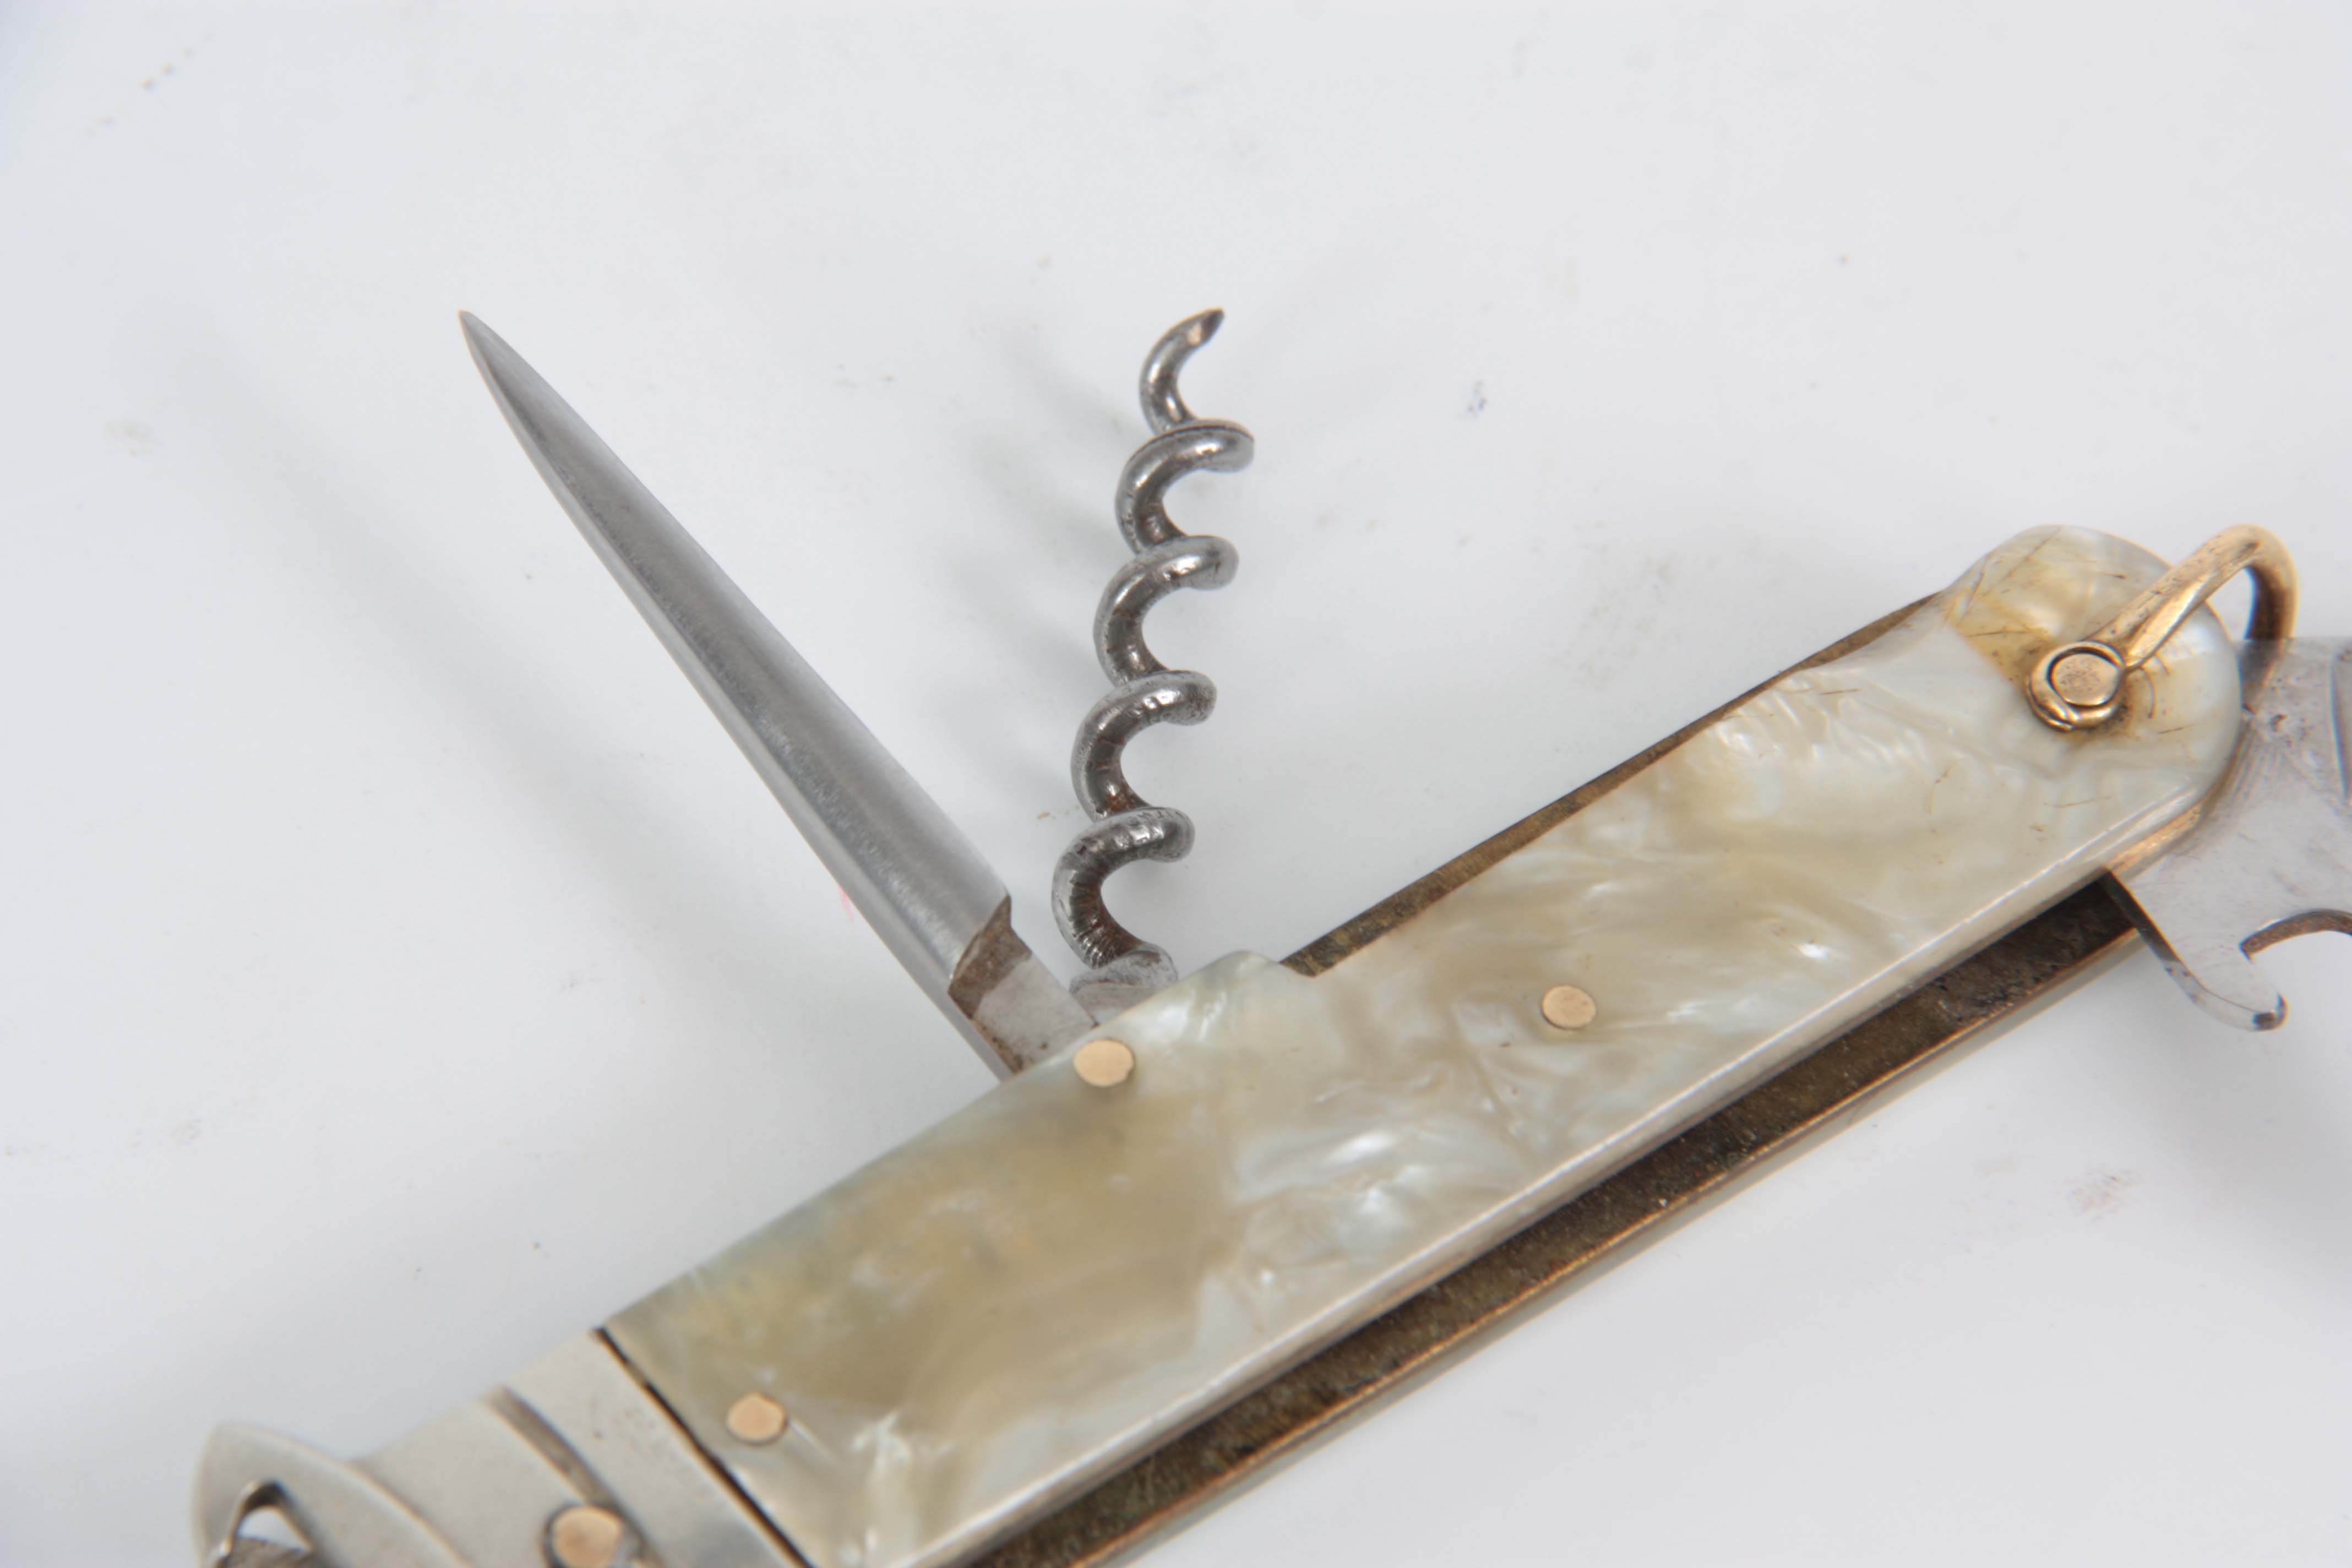 A VINTAGE SPANISH GENTLEMANS MULTI-FUNCTION HUNTING KNIFE with simulated mother of pearl handle - Image 3 of 6